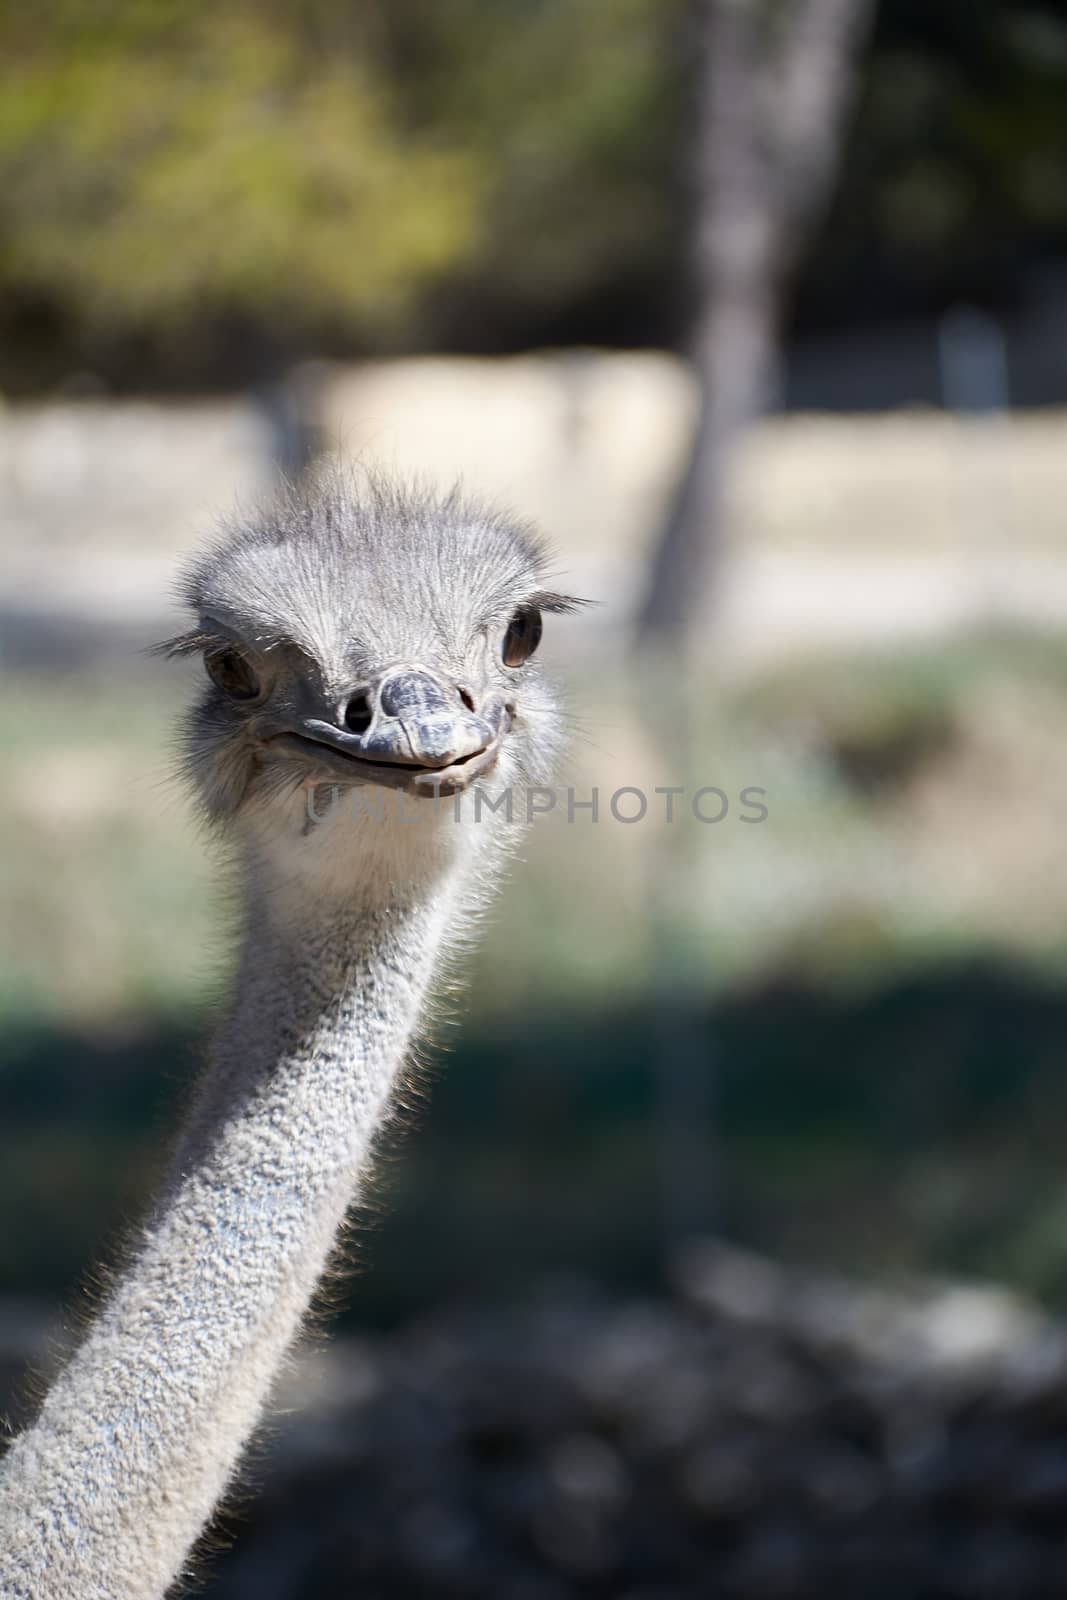 The friendly ostrich looking with her curious eyes. Mother nature animals